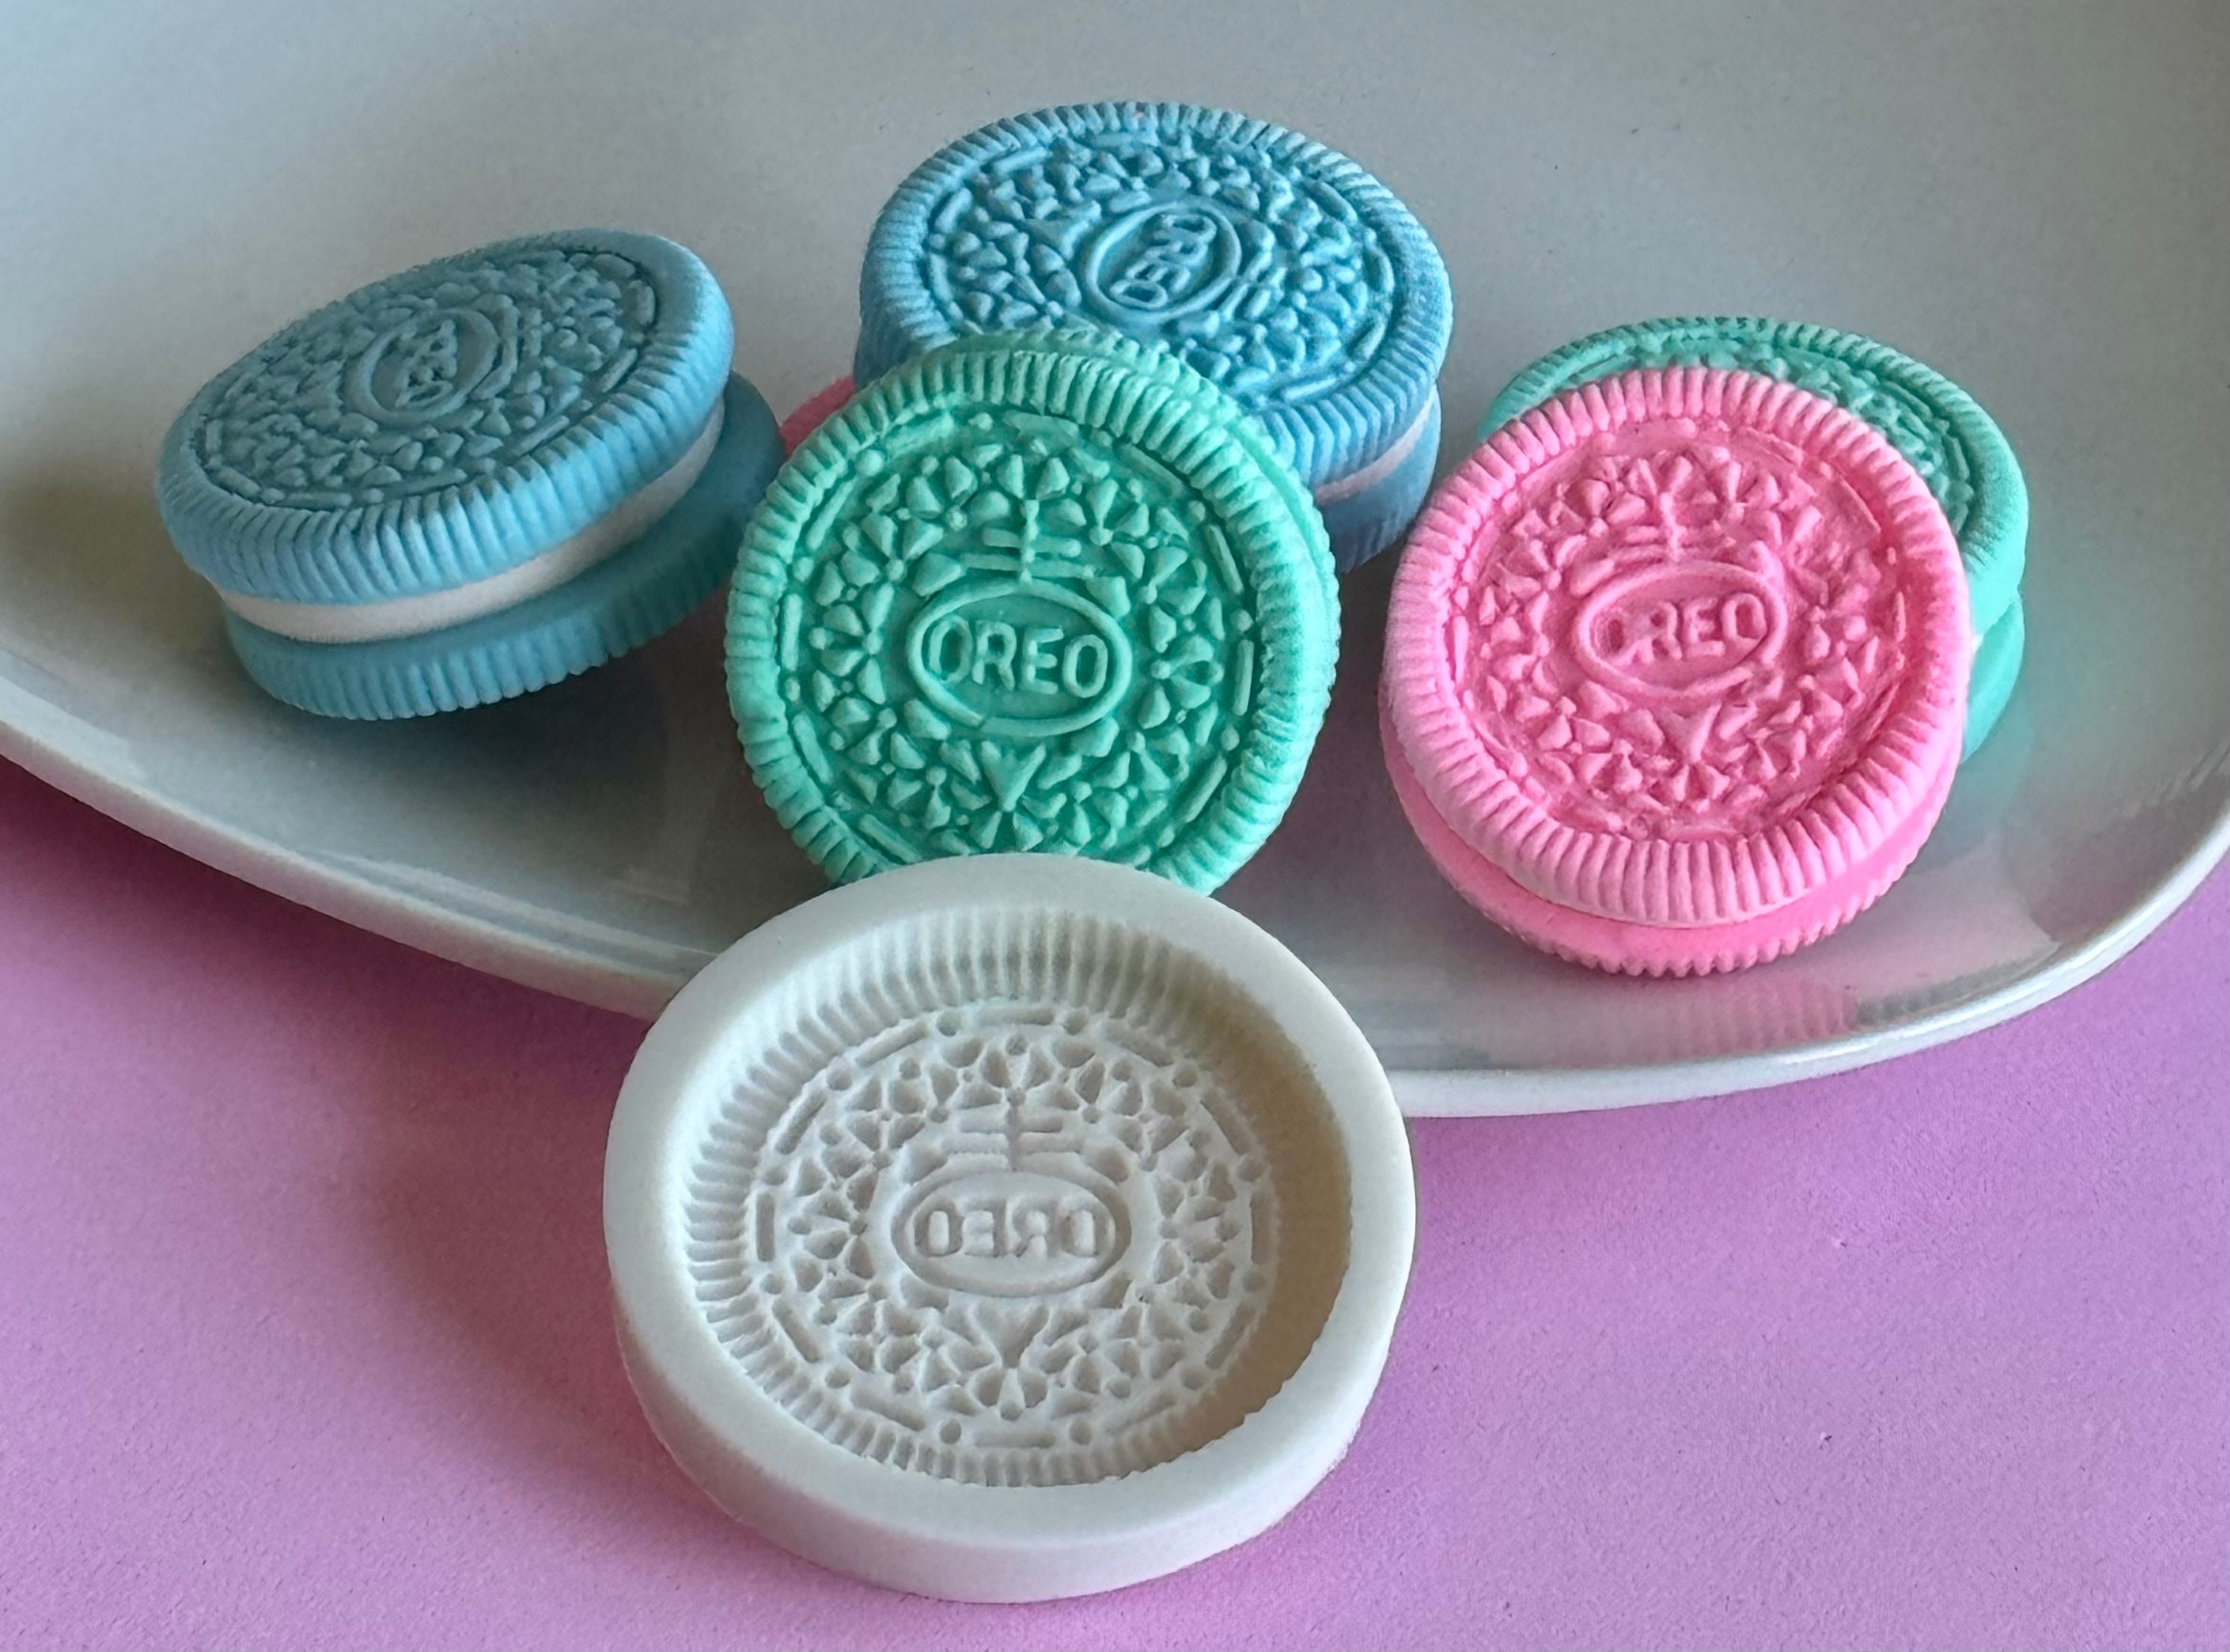  Silicone Oreo Cookie Mold, Walfos Round Cylinder Chocolate  Covered Oreos Molds, BPA Free and Non-Stick, Perfect for Cookies, Oreos,  Candy, Soap, Cupcake, Pudding, Jello, Set of 3 : Home & Kitchen